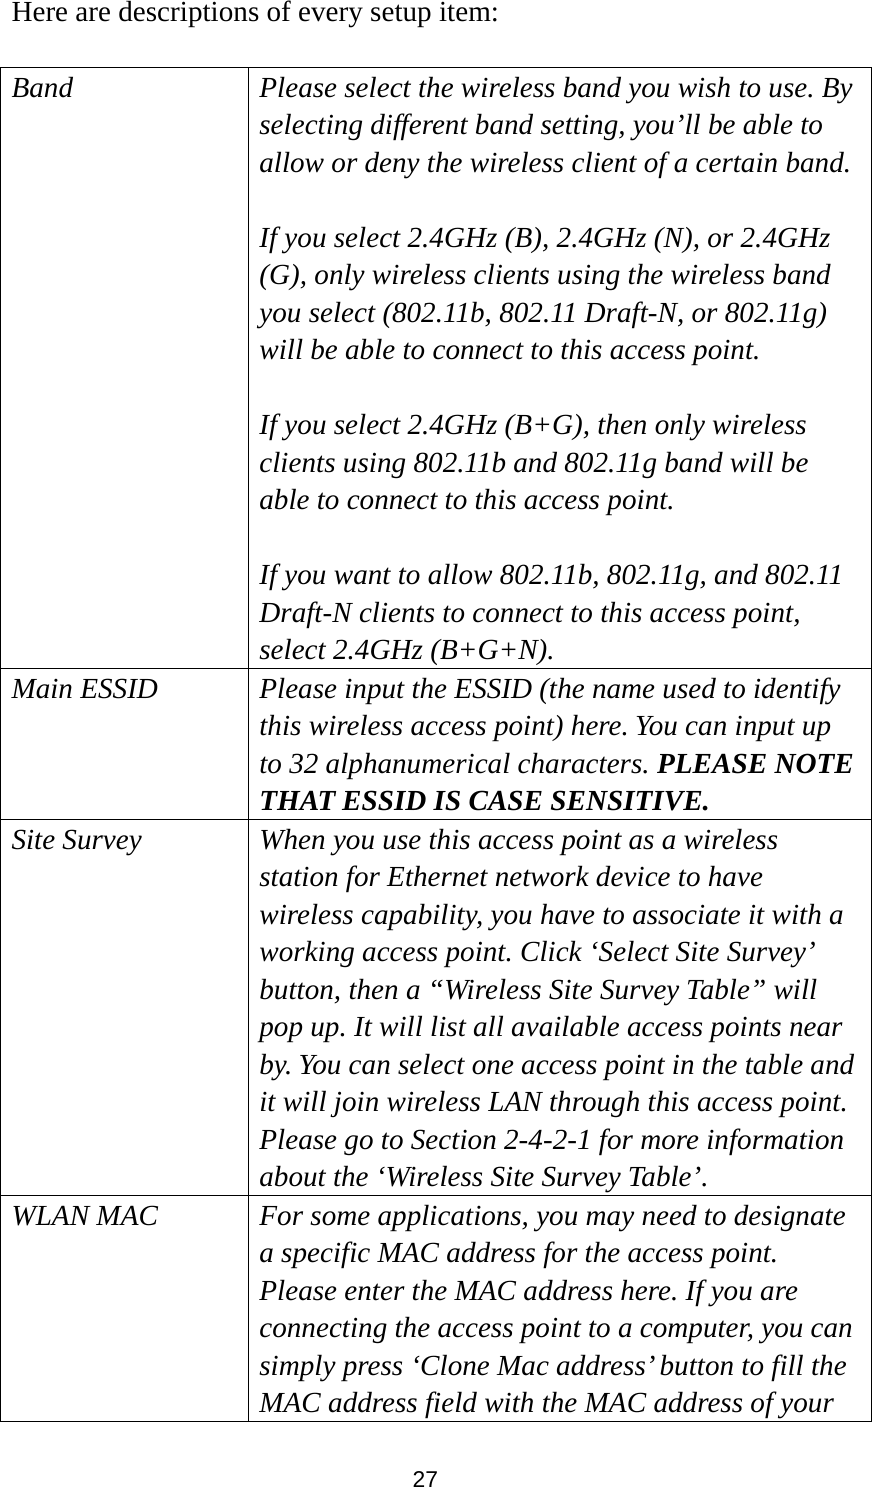  27 Here are descriptions of every setup item:  Band Please select the wireless band you wish to use. By selecting different band setting, you’ll be able to allow or deny the wireless client of a certain band.  If you select 2.4GHz (B), 2.4GHz (N), or 2.4GHz (G), only wireless clients using the wireless band you select (802.11b, 802.11 Draft-N, or 802.11g) will be able to connect to this access point.  If you select 2.4GHz (B+G), then only wireless clients using 802.11b and 802.11g band will be able to connect to this access point.    If you want to allow 802.11b, 802.11g, and 802.11 Draft-N clients to connect to this access point, select 2.4GHz (B+G+N). Main ESSID Please input the ESSID (the name used to identify this wireless access point) here. You can input up to 32 alphanumerical characters. PLEASE NOTE   THAT ESSID IS CASE SENSITIVE. Site Survey When you use this access point as a wireless station for Ethernet network device to have wireless capability, you have to associate it with a working access point. Click ‘Select Site Survey’ button, then a “Wireless Site Survey Table” will pop up. It will list all available access points near by. You can select one access point in the table and it will join wireless LAN through this access point. Please go to Section 2-4-2-1 for more information about the ‘Wireless Site Survey Table’. WLAN MAC For some applications, you may need to designate a specific MAC address for the access point. Please enter the MAC address here. If you are connecting the access point to a computer, you can simply press ‘Clone Mac address’ button to fill the MAC address field with the MAC address of your 